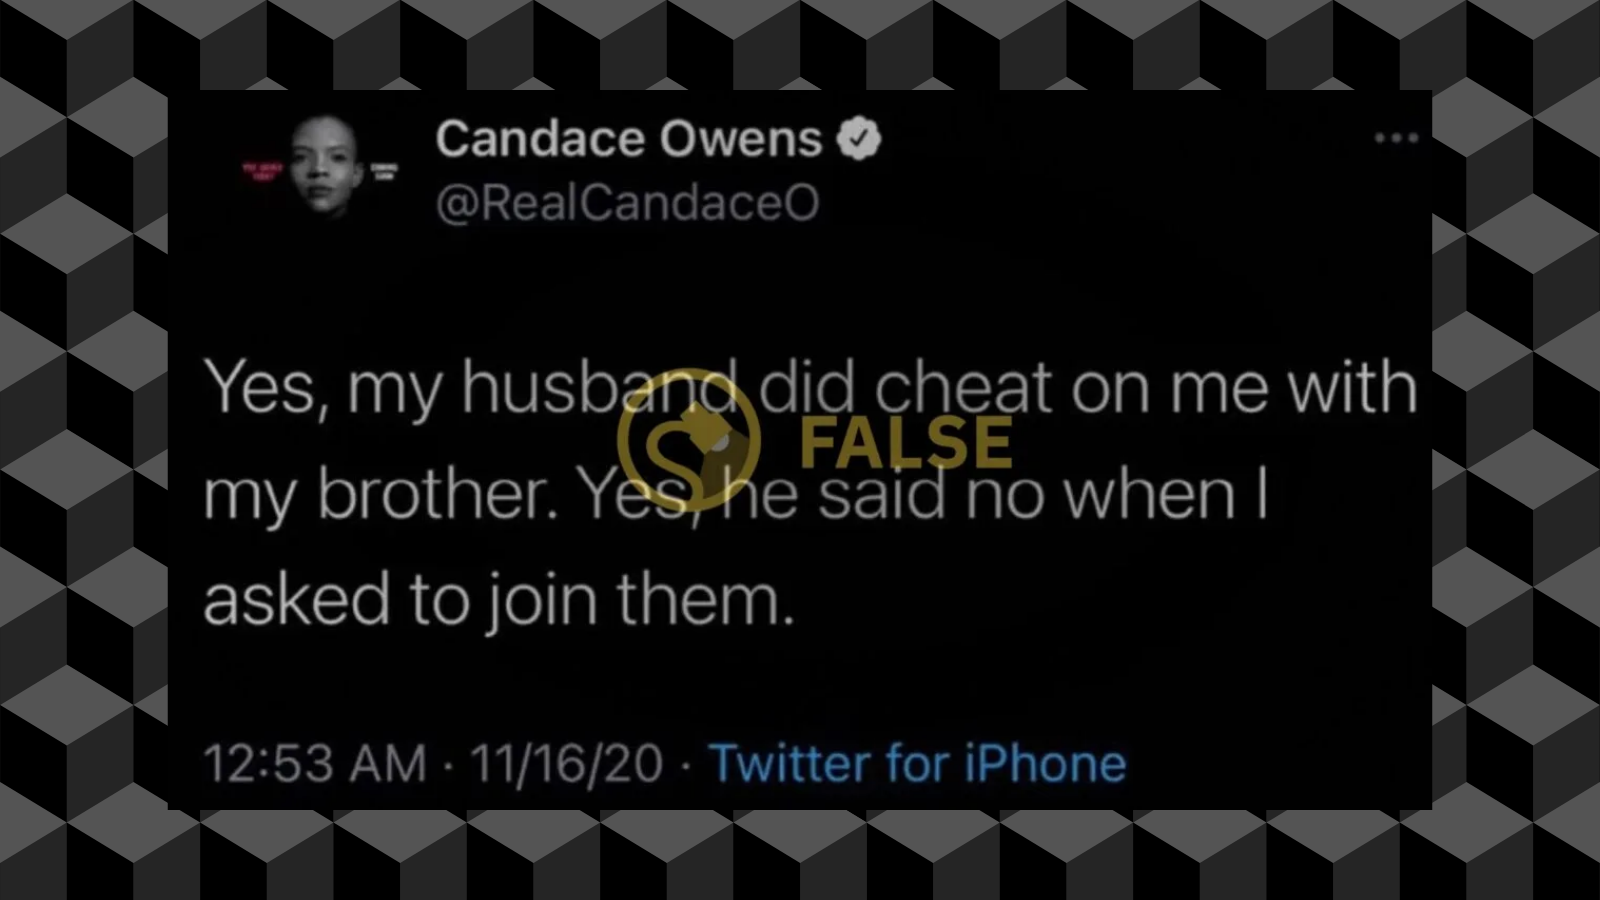 fake tweet about candace owen, her brother, and her husband